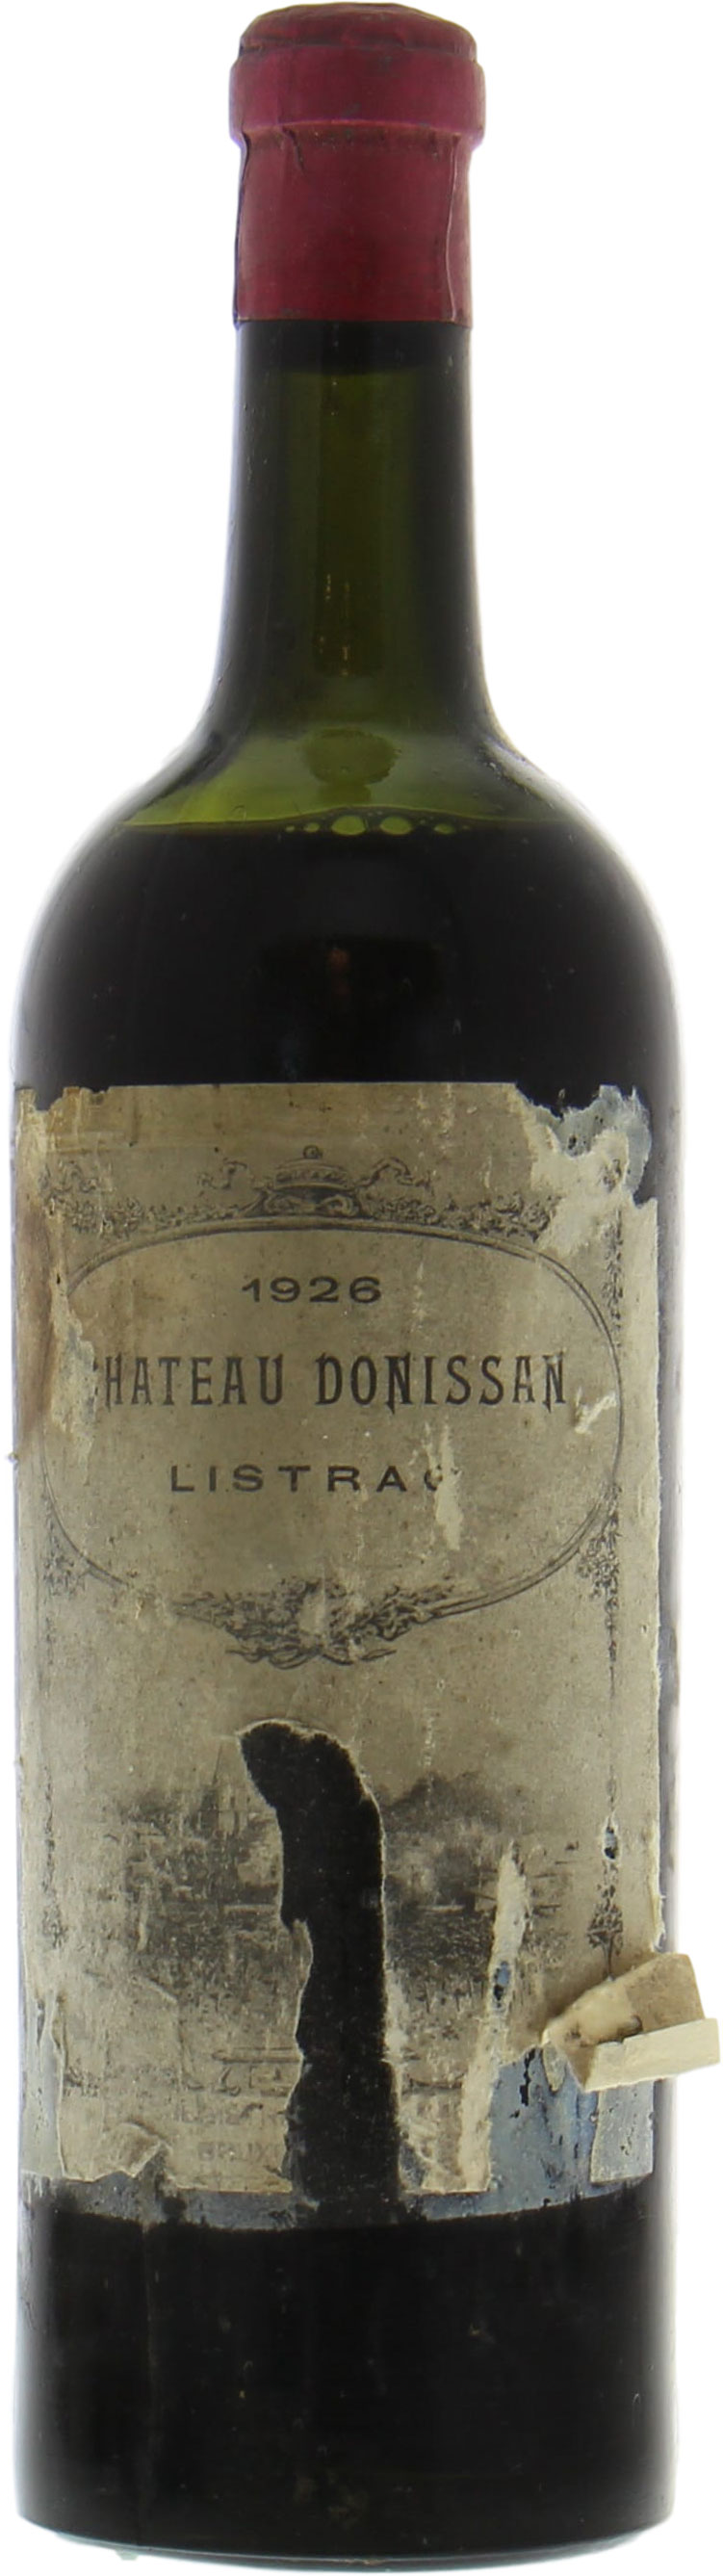 Chateau Donissan - Chateau Donissan 1926 High shoulder